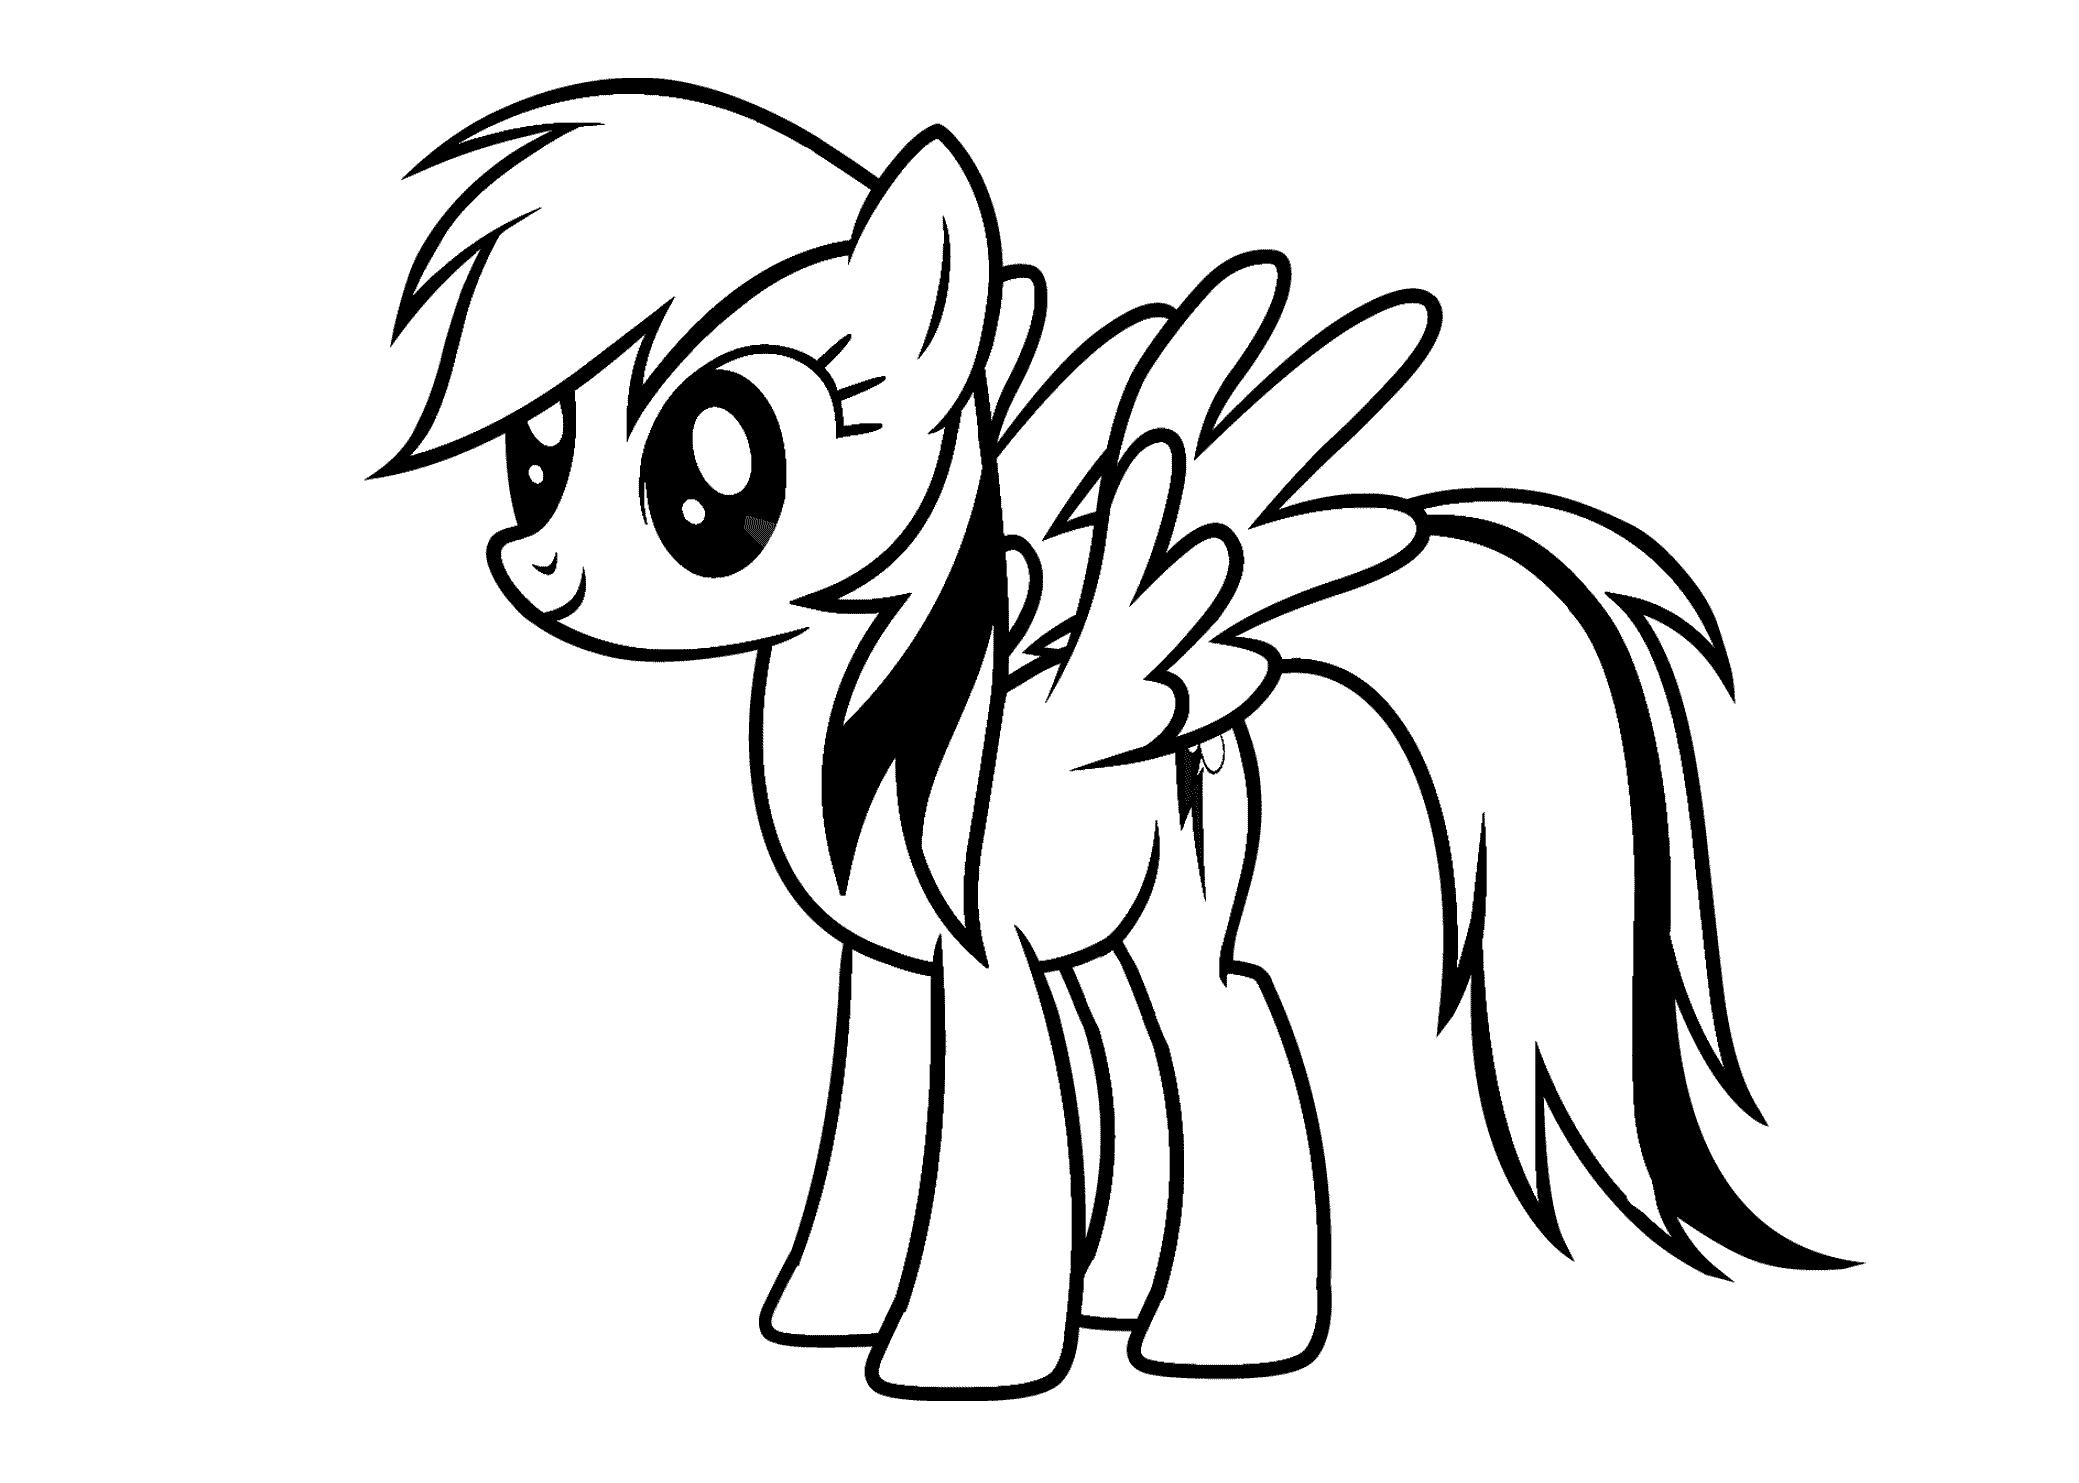 My Little Pony Rainbow Dash Coloring Pages | Free download ...